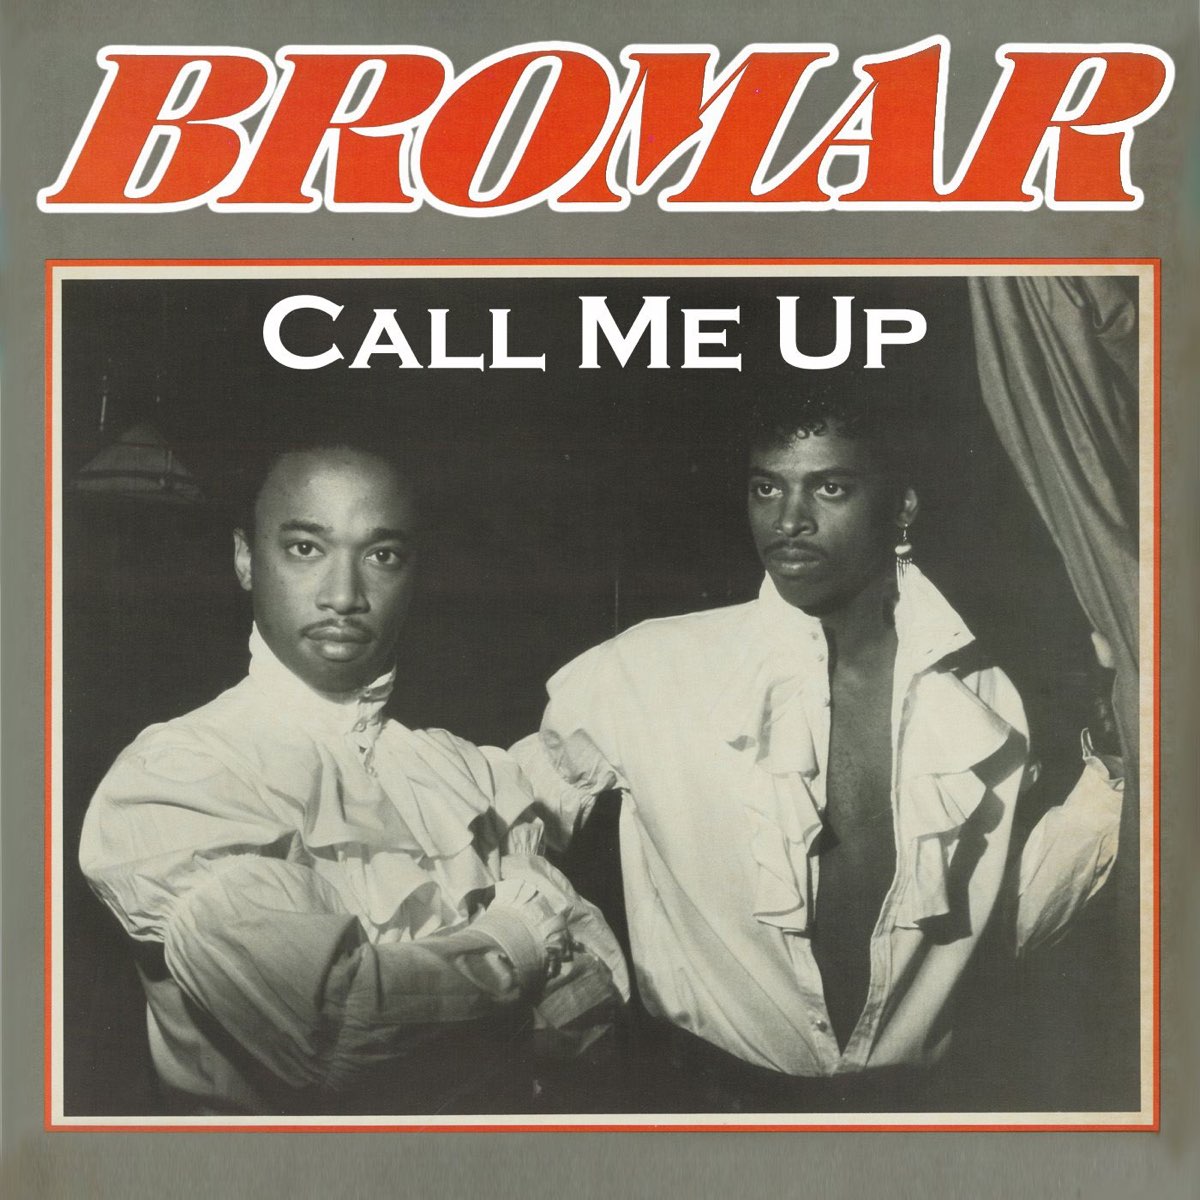 Call Me Up - EP by Bromar on Apple Music